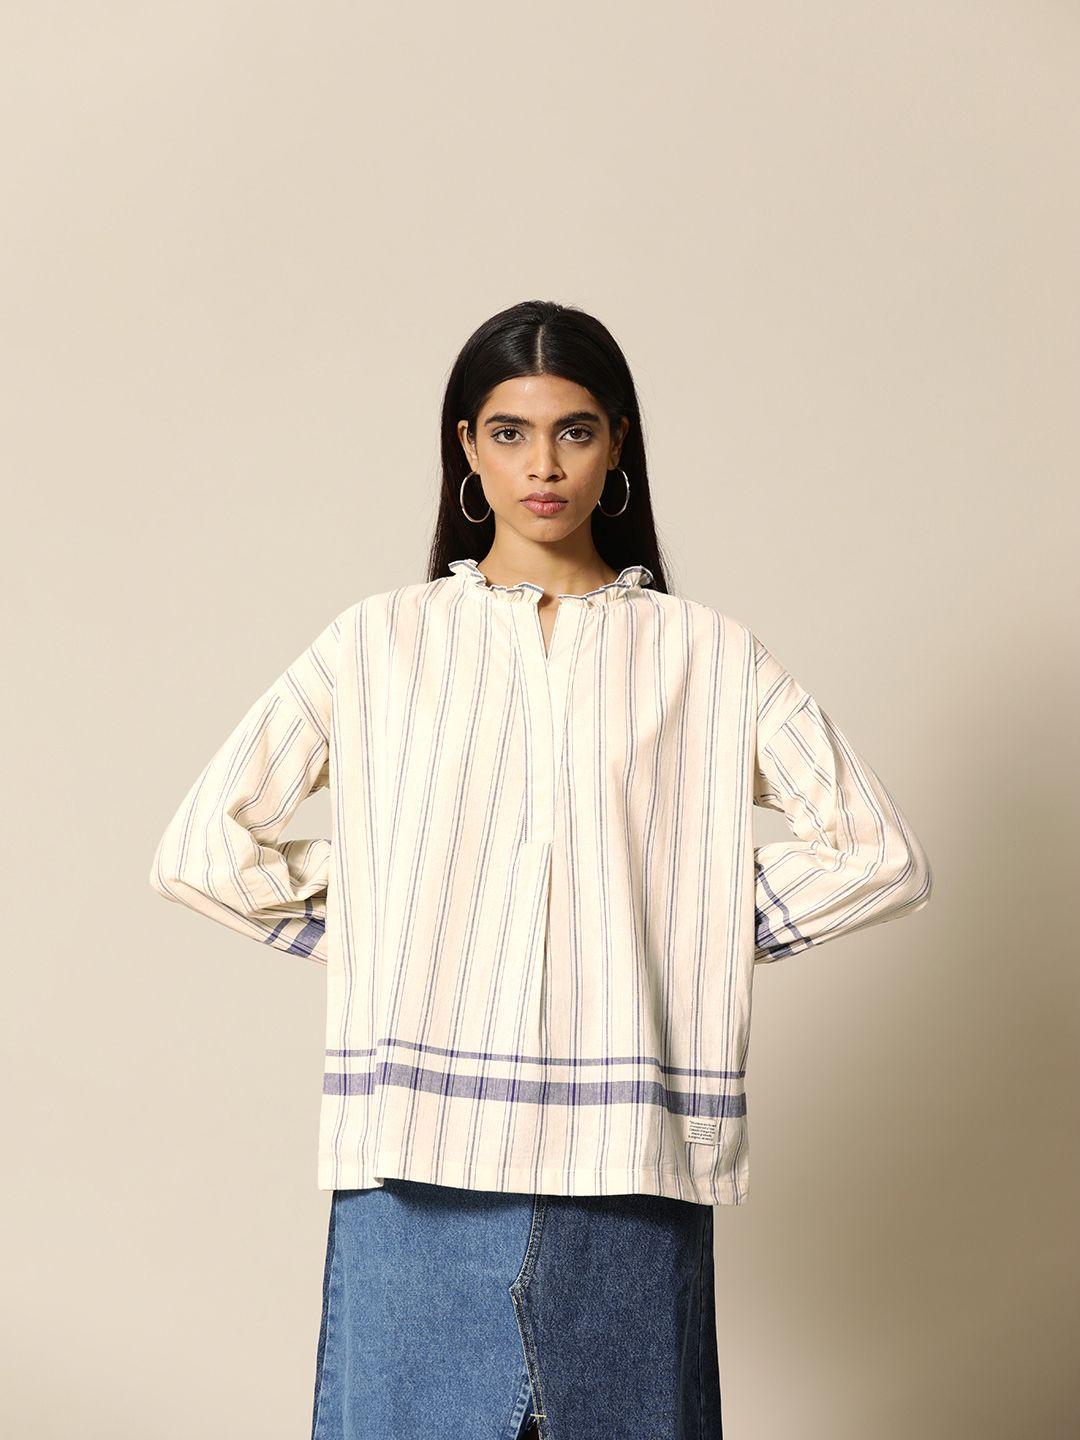 bower white & navy blue woven pin striped ruffled collar top